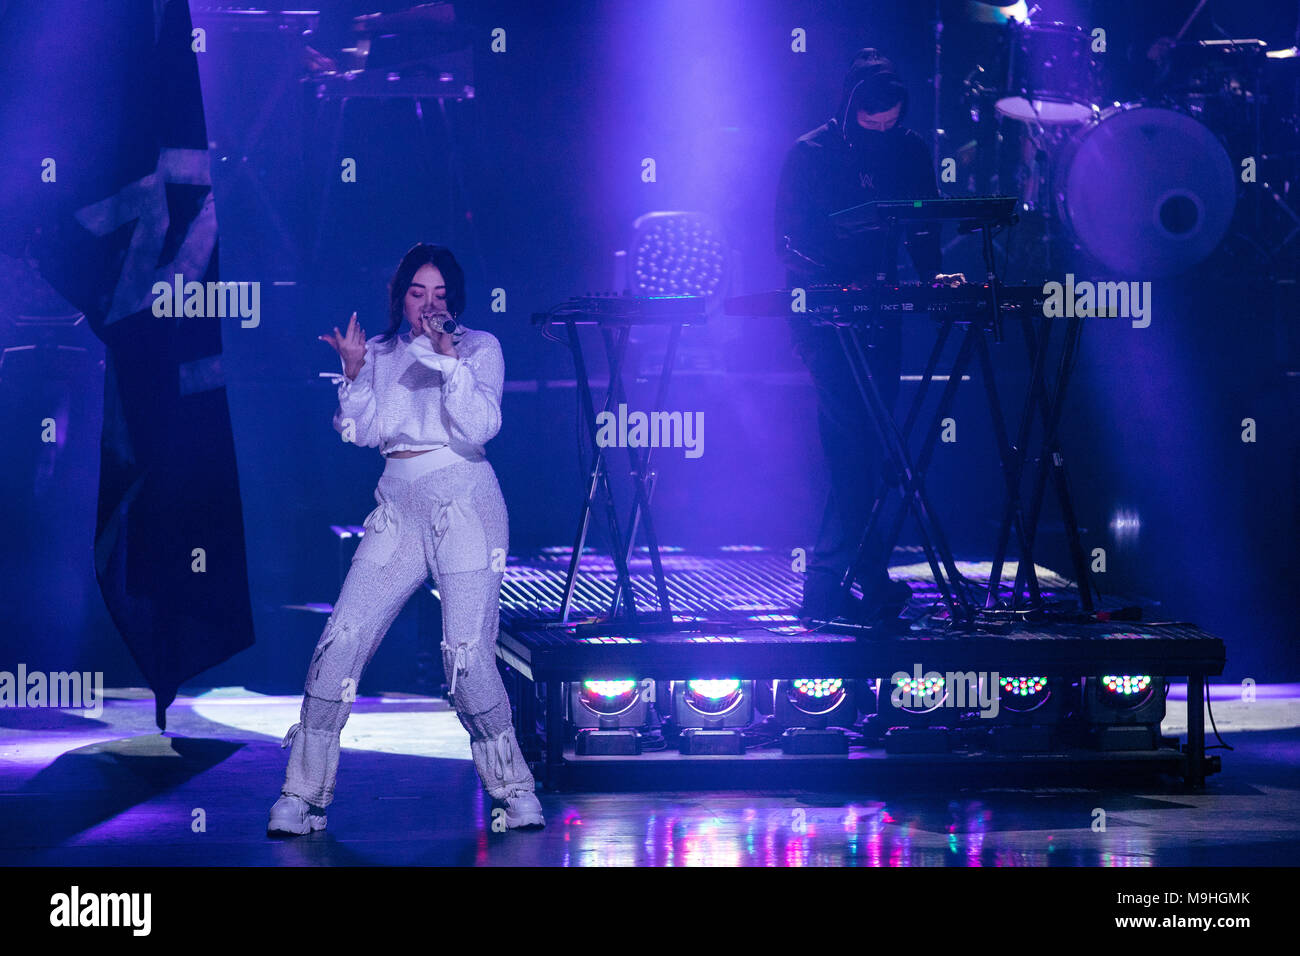 Norway, Oslo - February 25, 2018. The Norwegian DJ and record producer Alan Walker performs a live concert at Oslo Konserthus during the Norwegian Grammy Awards, Spellemannprisen 2017, in Oslo. Here the American singer Noah Cyrus makes a guest appearance. (Photo credit: Gonzales Photo - Stian S. Moller). Stock Photo